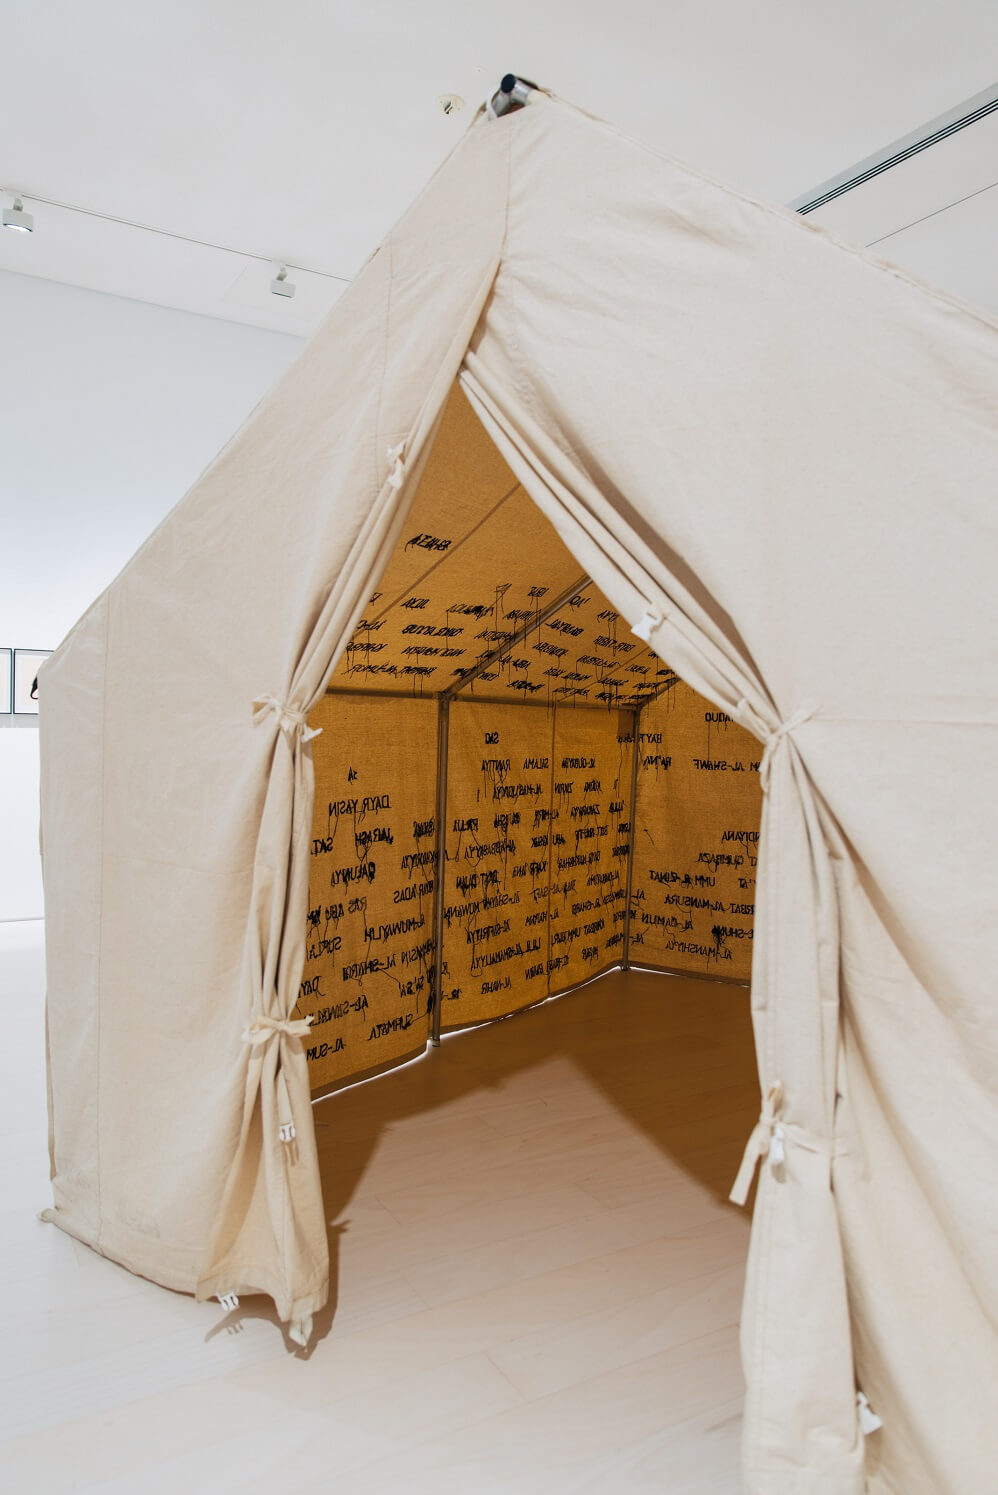 Tent by Emily Jacir. Collection of the National Museum of Contemporary Art Athens. | Photo: Thomas Gravanis 